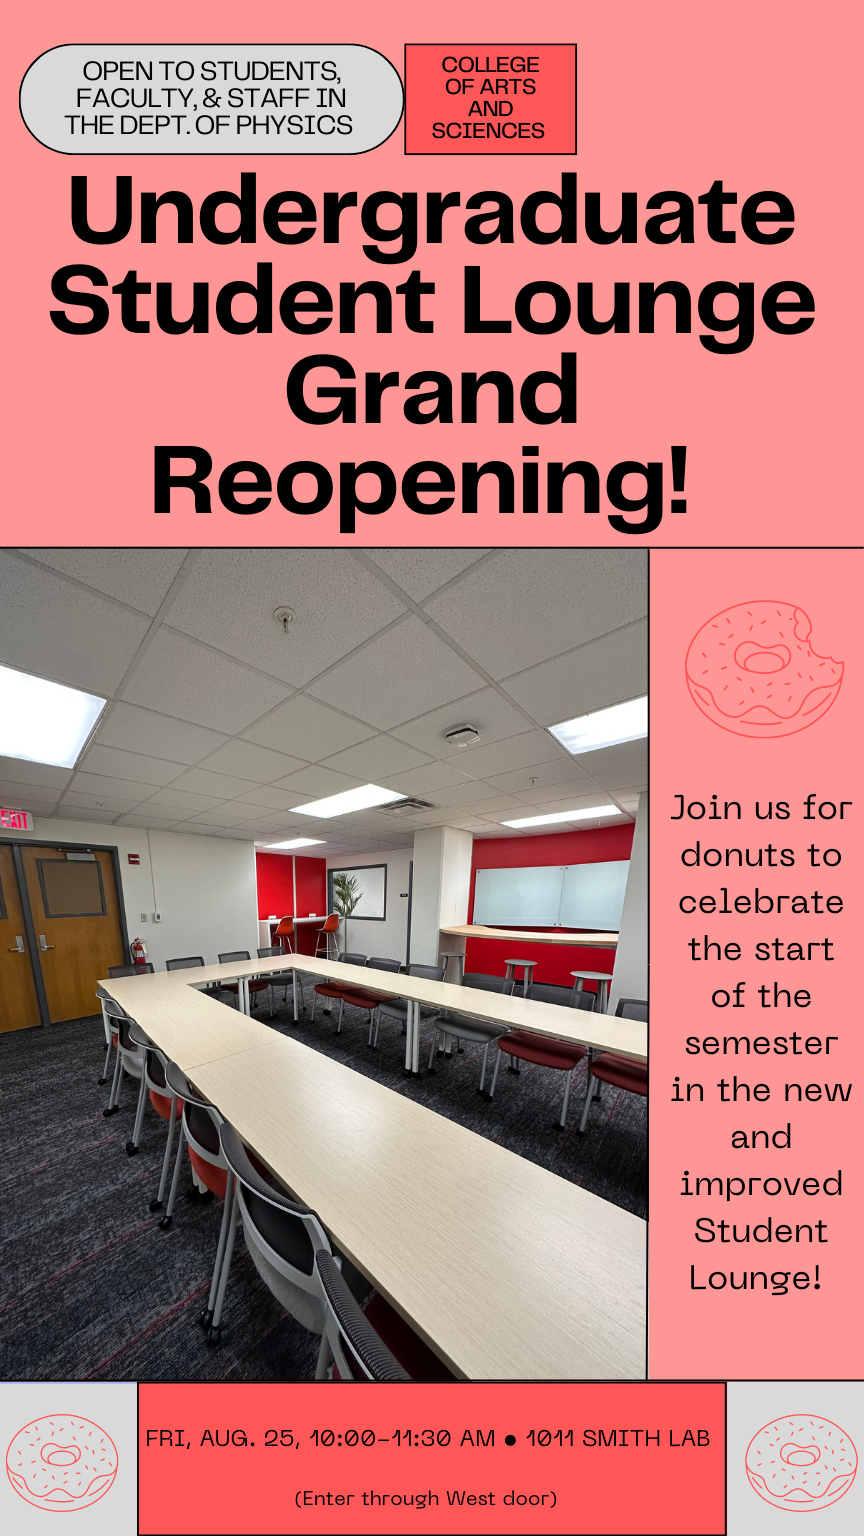 Flyer promoting Grand Reopening event on Friday, August 25th at 10:00 AM